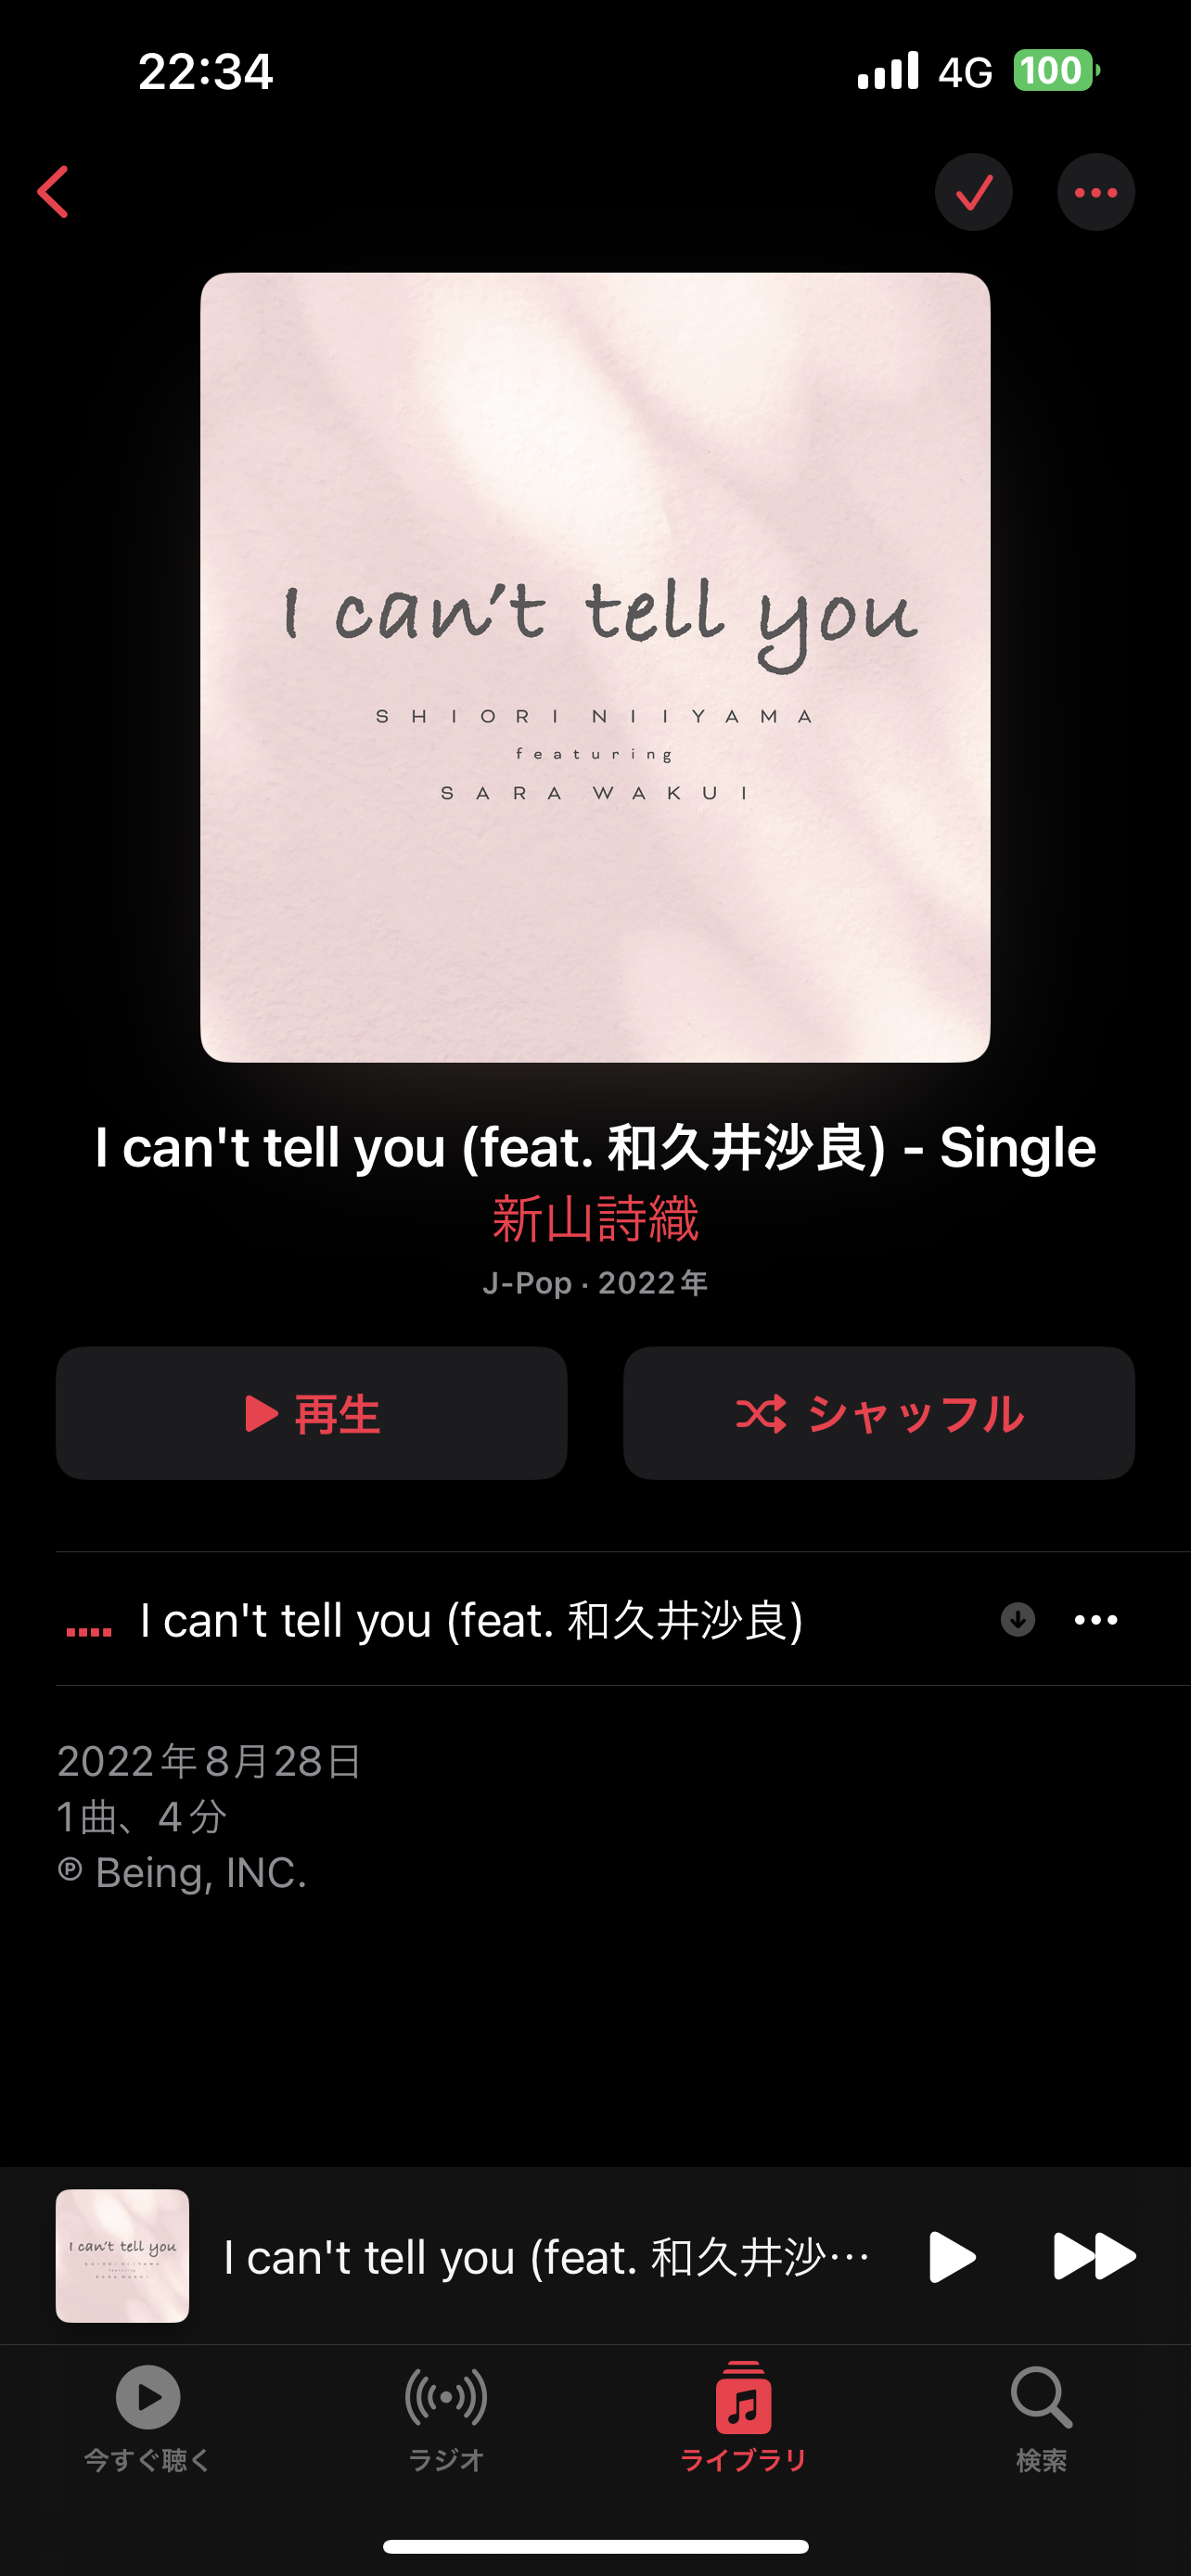 I can't tell you (feat.和久井沙良)